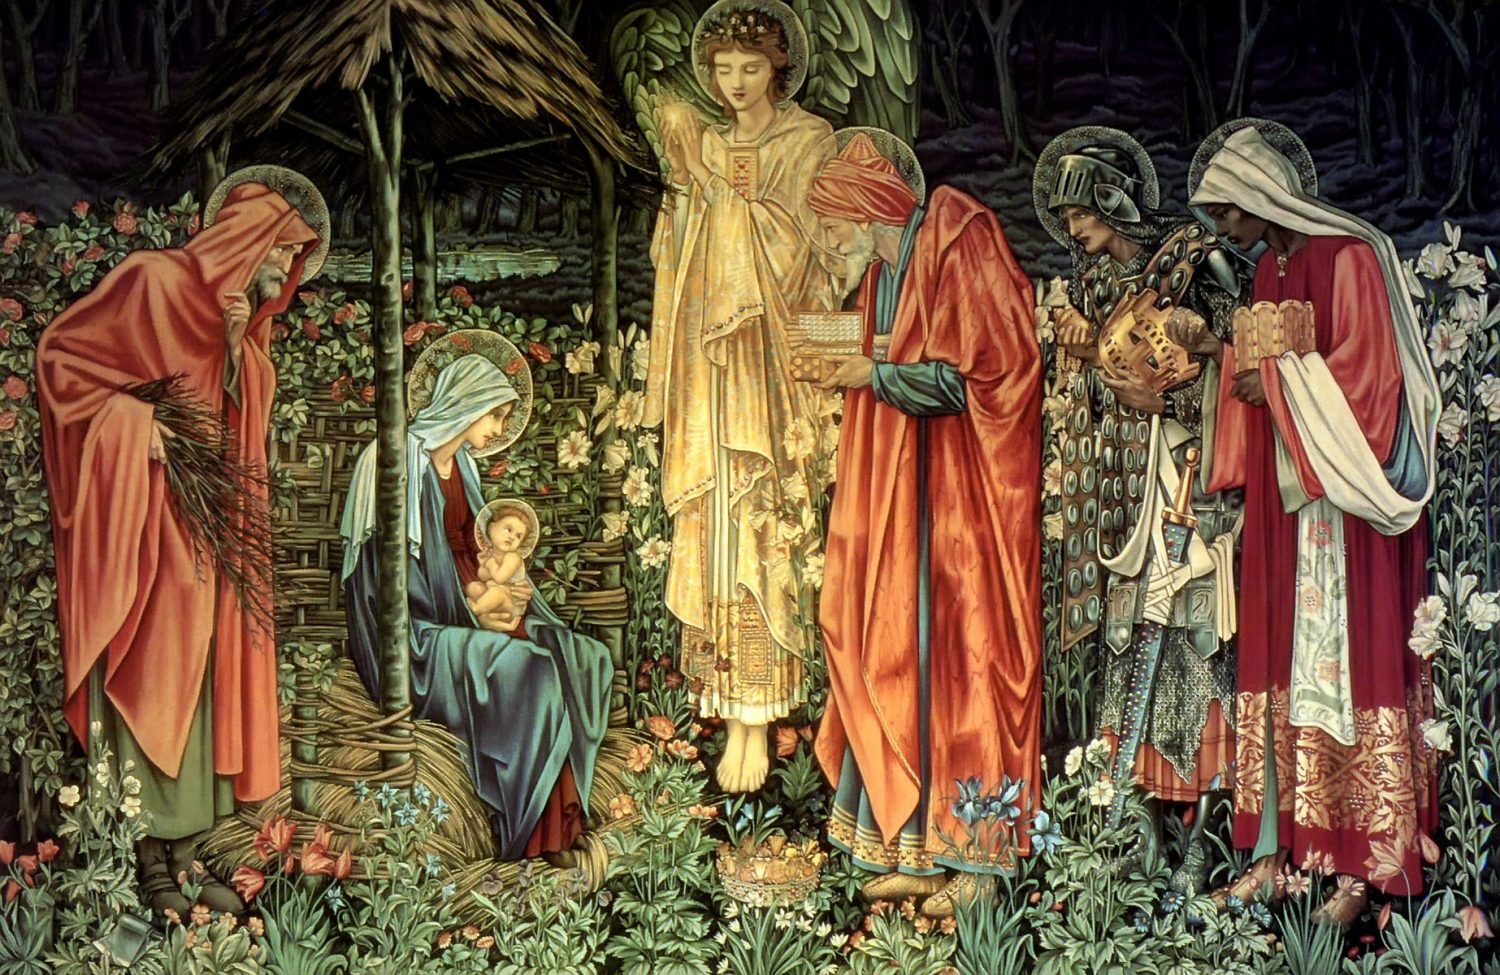 The true meaning of Epiphany is Christ's call to give him